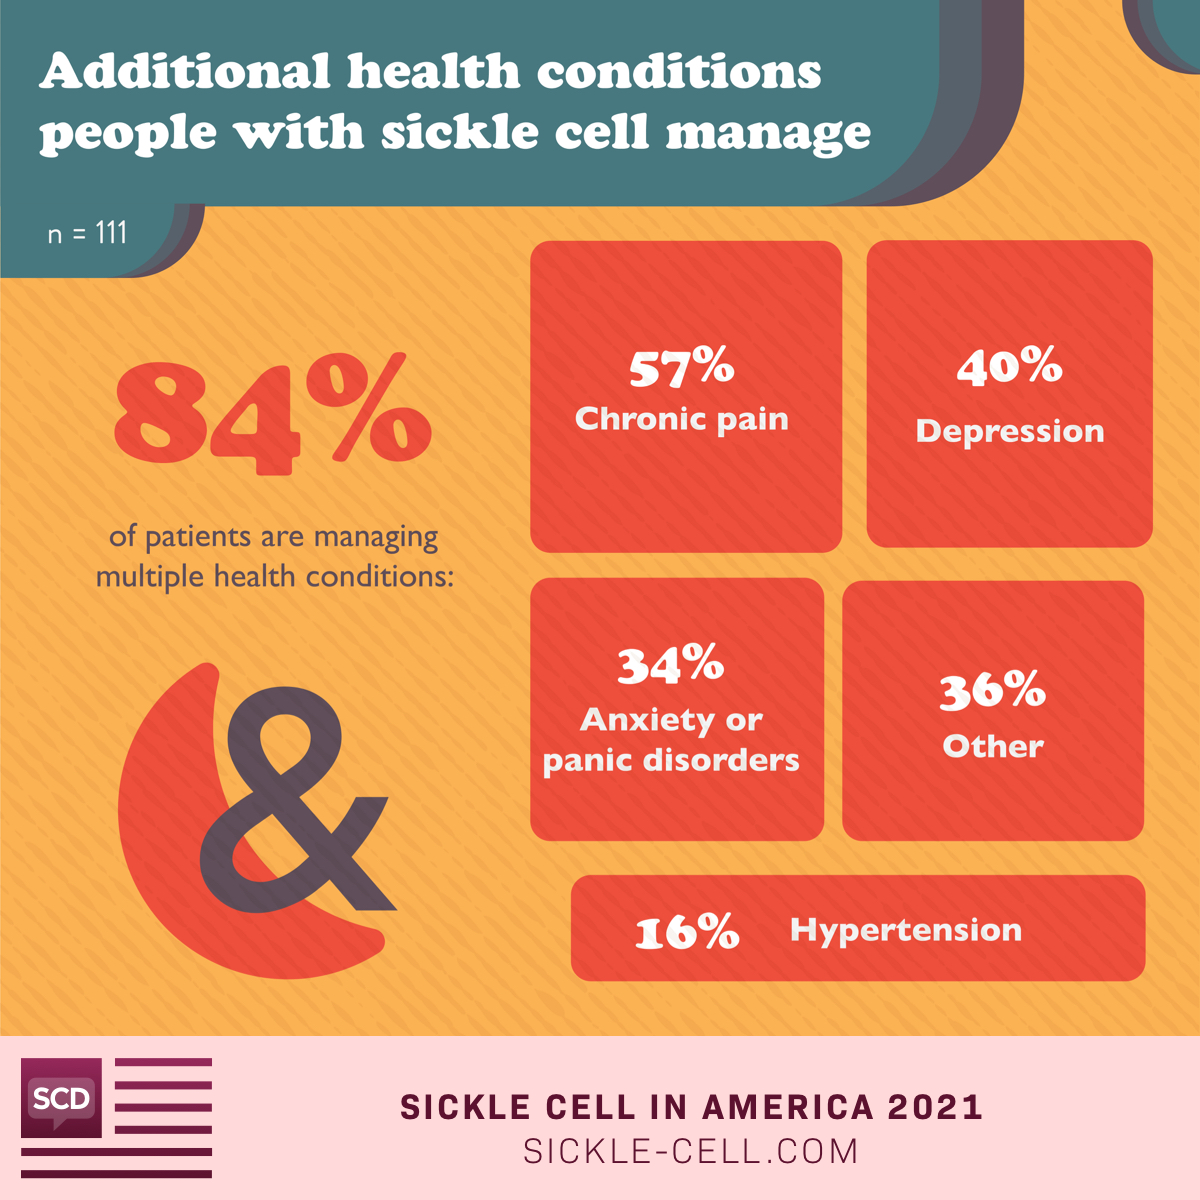 84% of patients experience other health conditions, such as chronic pain, depression, anxiety, and hypertension. 